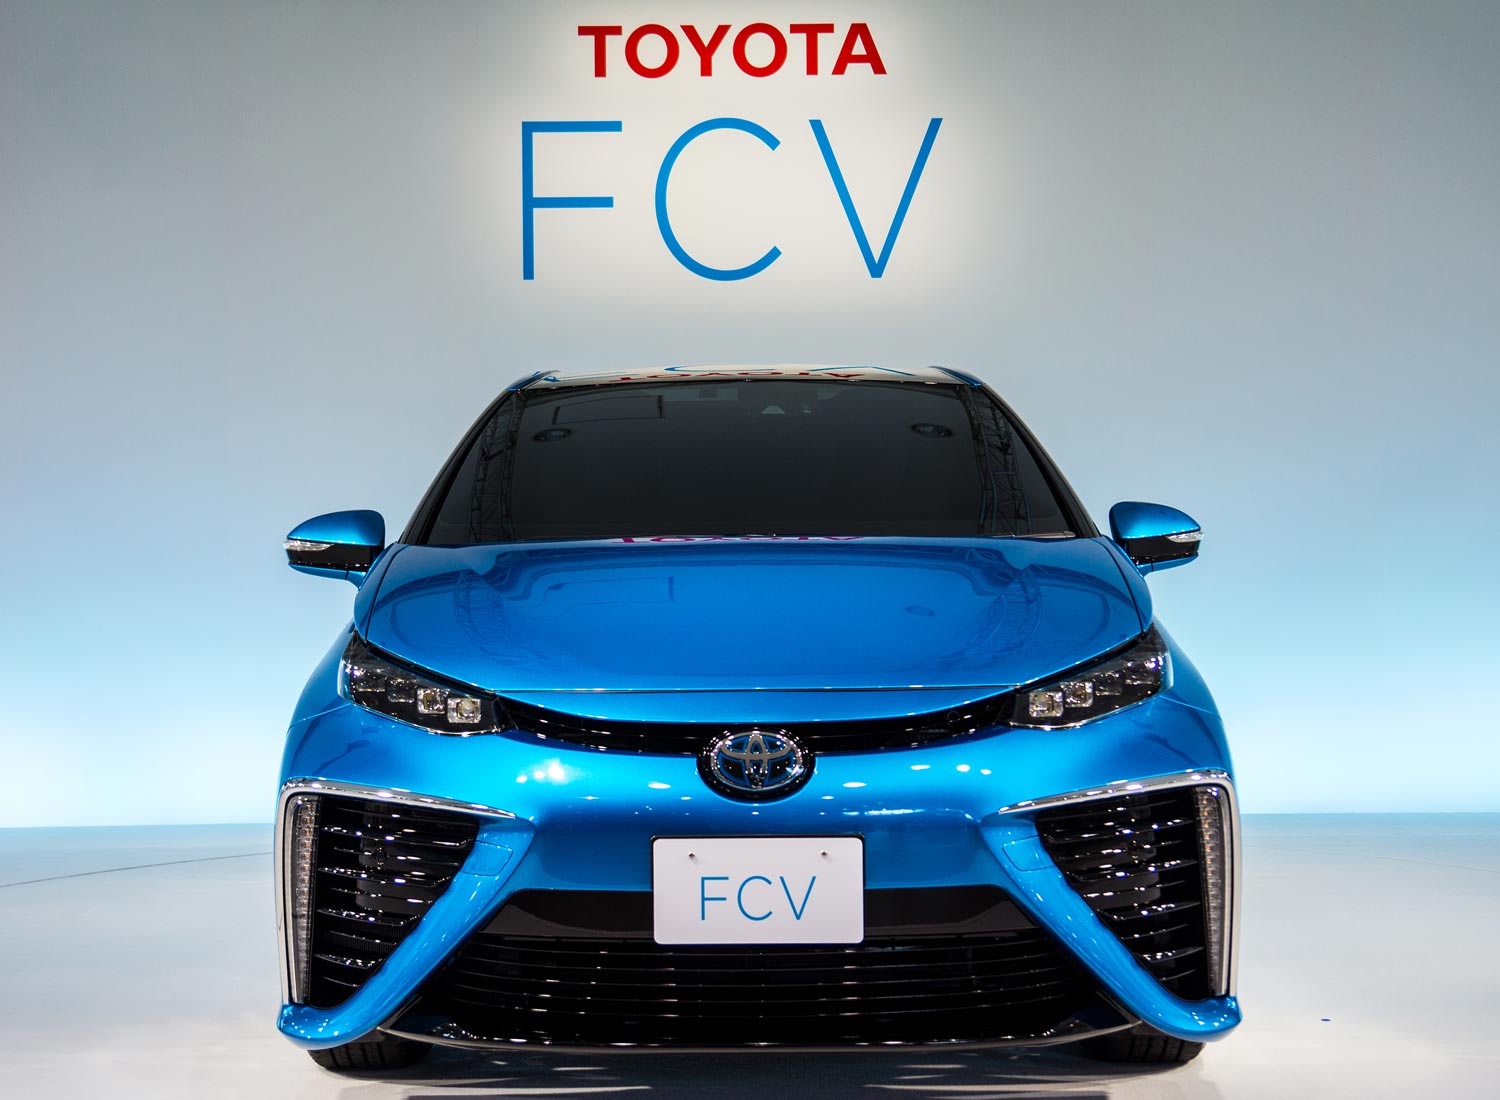 Toyota-Mirai-The-Future-Hydrogen-Fuel-cell-car-from-Toyota-3